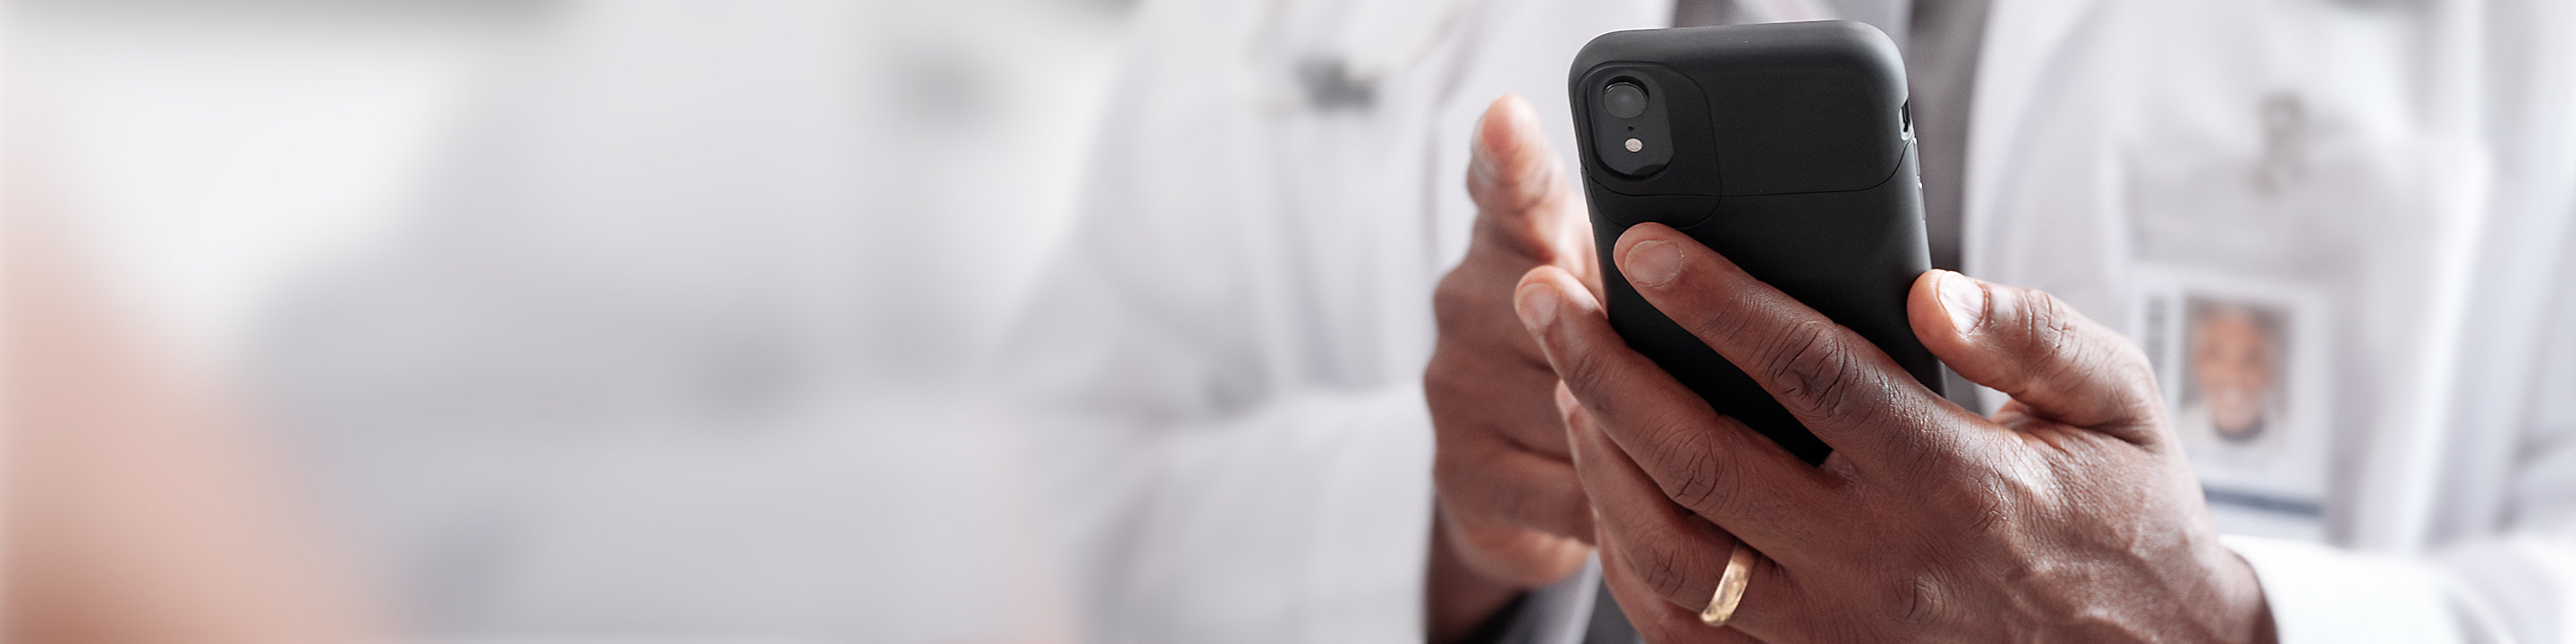 A medical professional reviewing contact information on a smartphone device